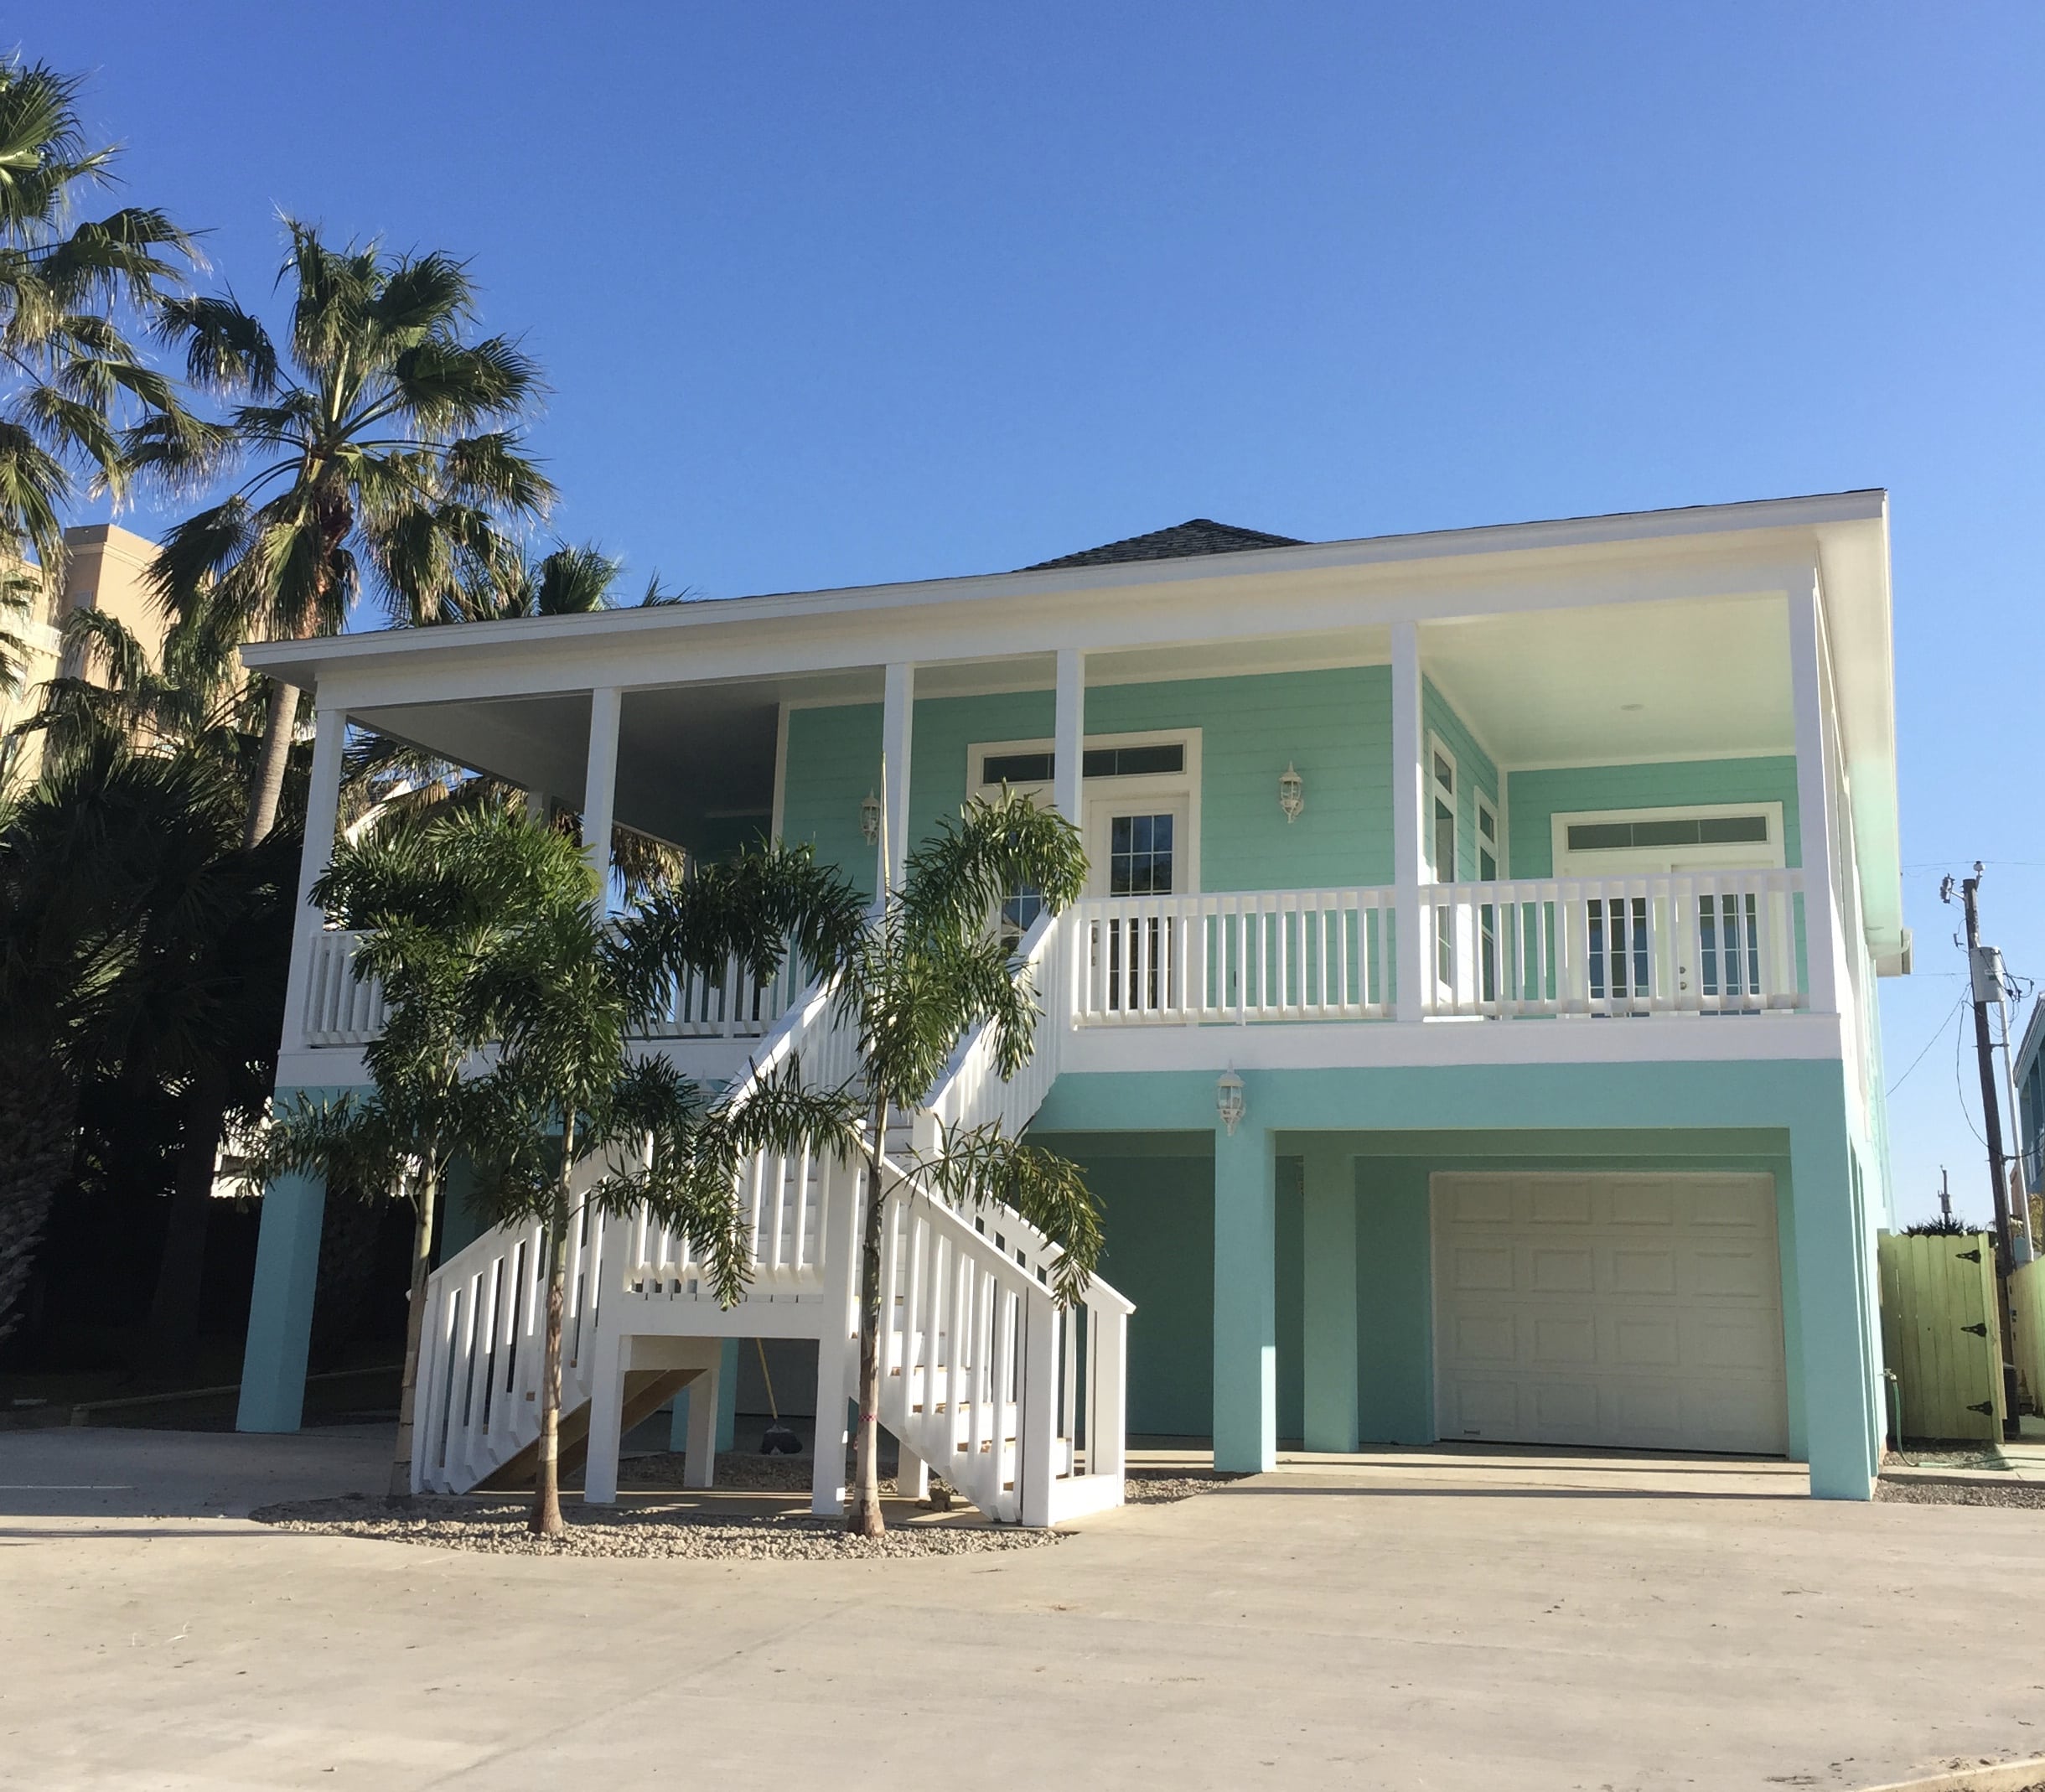 129 E. Jupiter: South Padre Island 4 Bedroom Accommodations With Heated ...